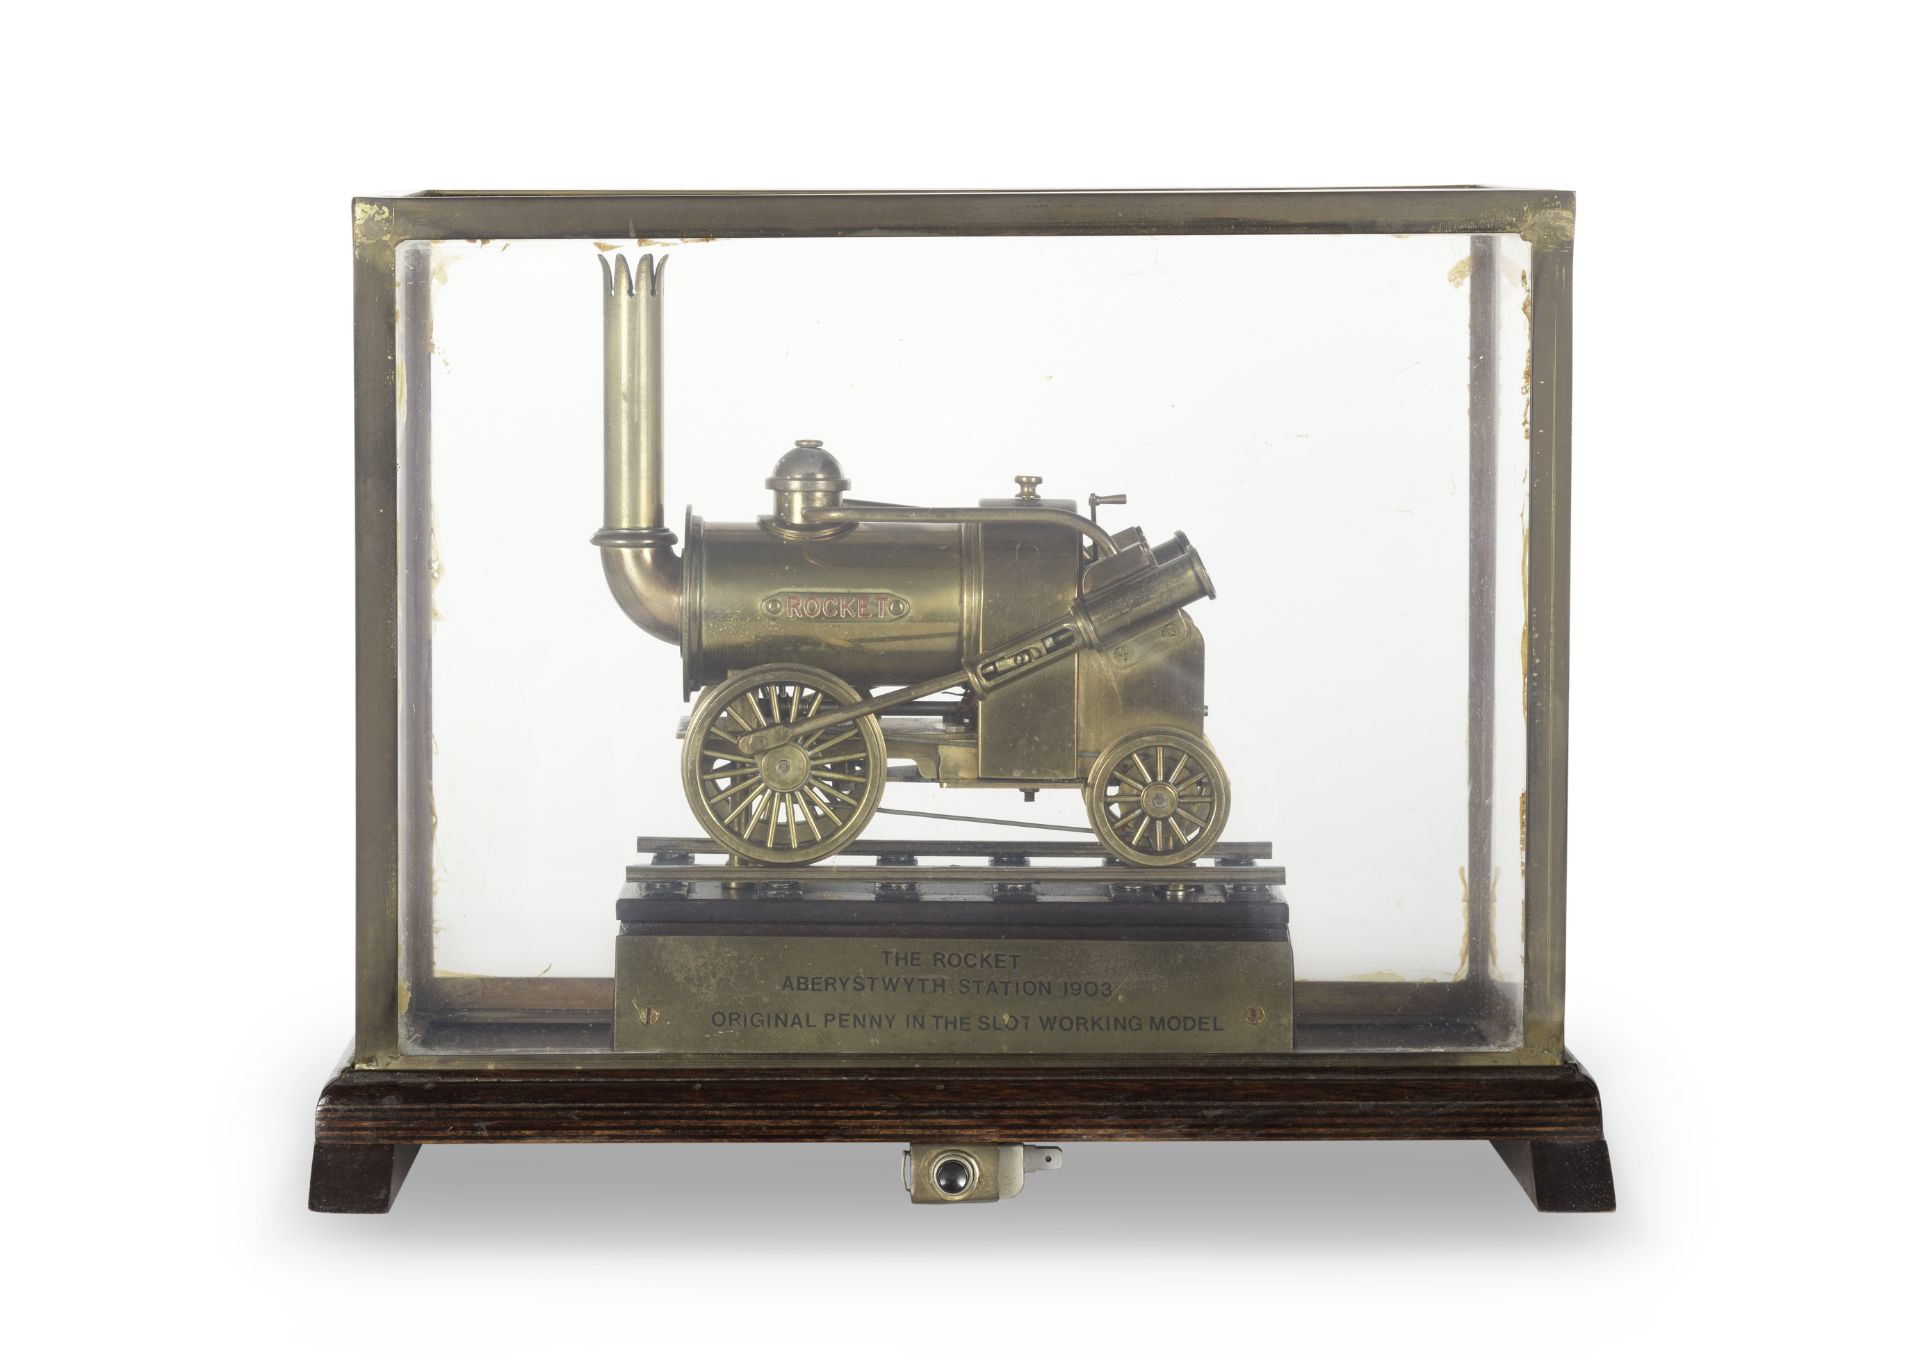 A railway station coin operated display model of the Rocket locomotive, English, early 20th ce...